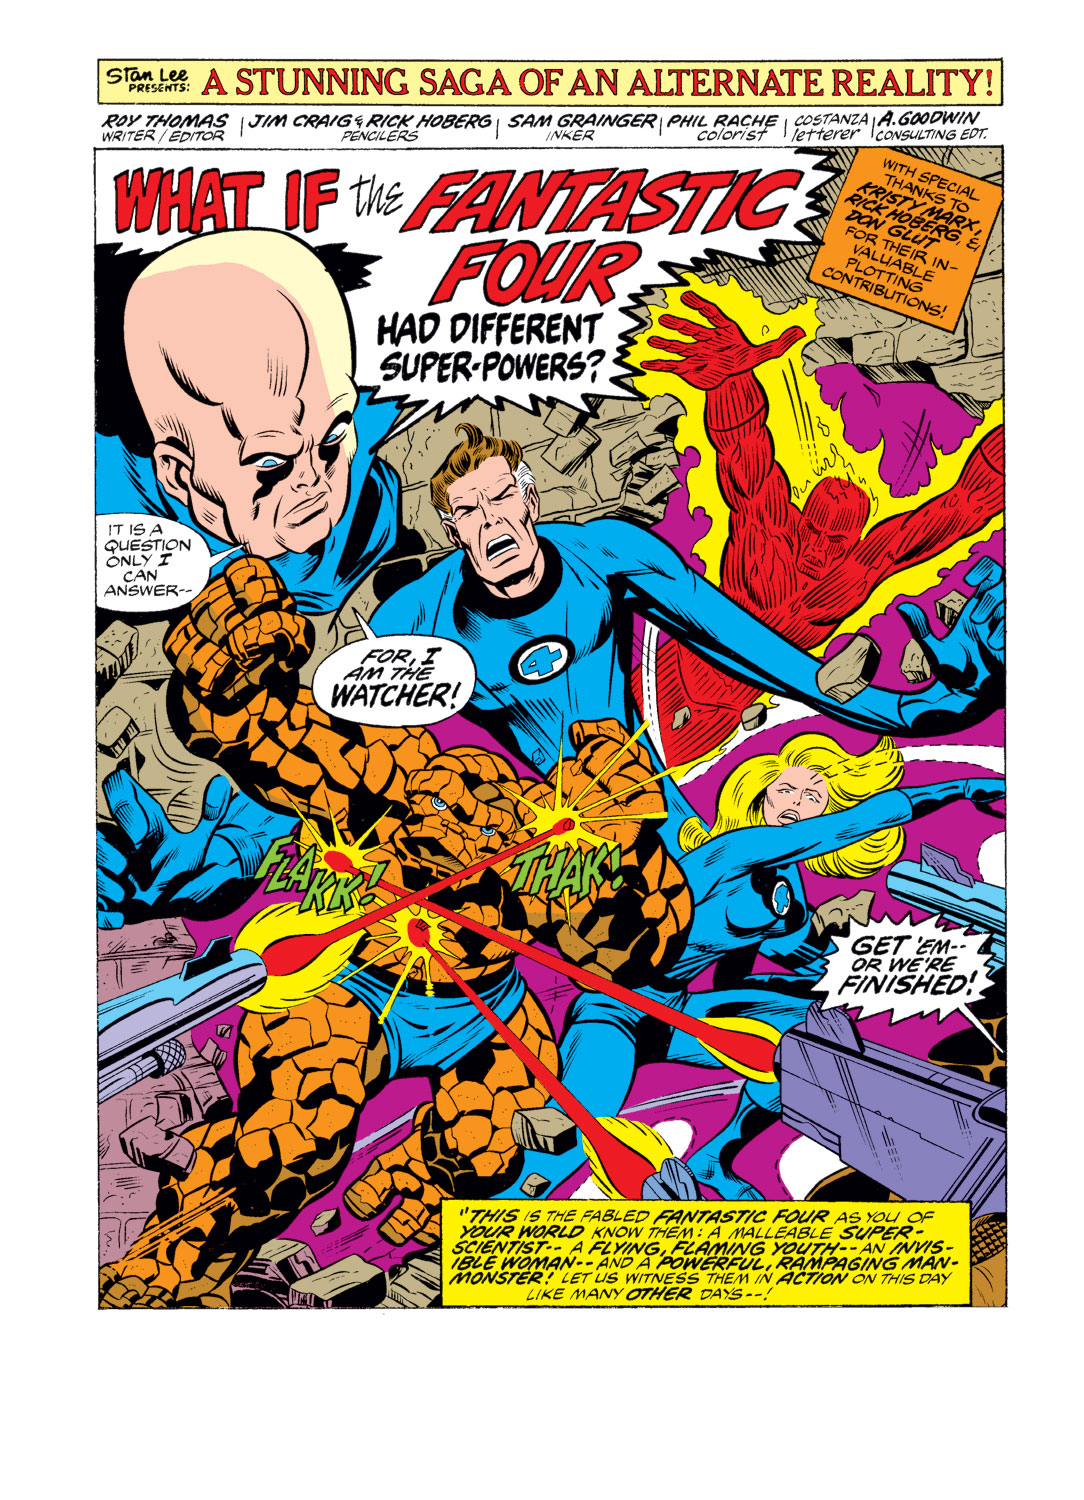 What If? (1977) issue 6 - The Fantastic Four had different superpowers - Page 2